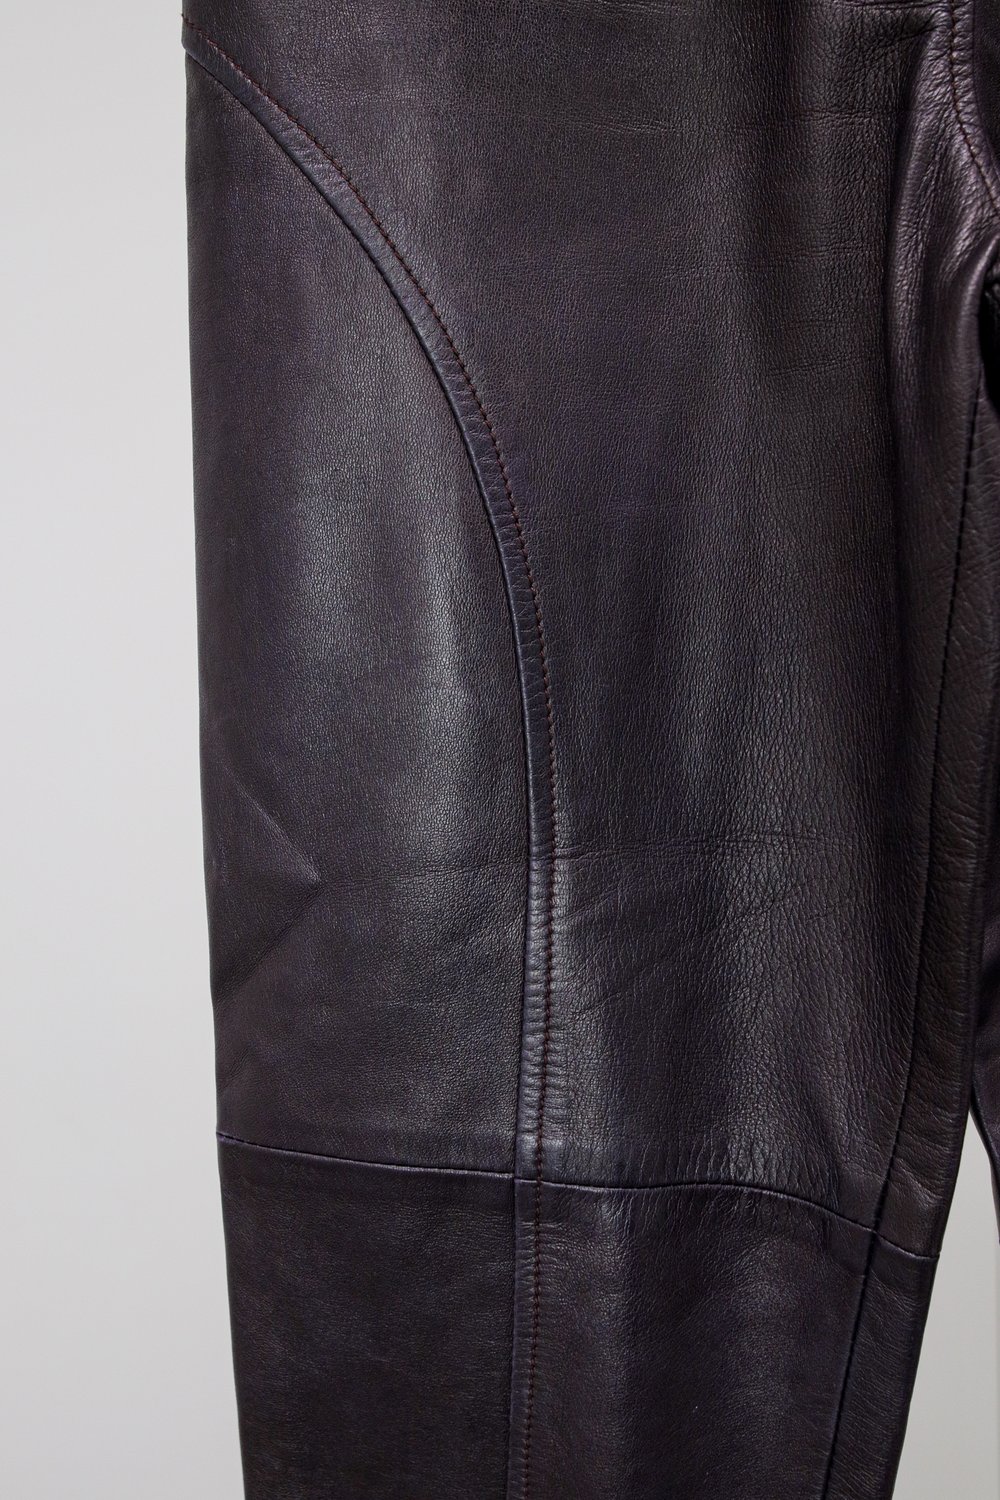 Gucci 90s Tom Ford Era Aubergine Leather Pants — BLOGGER ARMOIRE